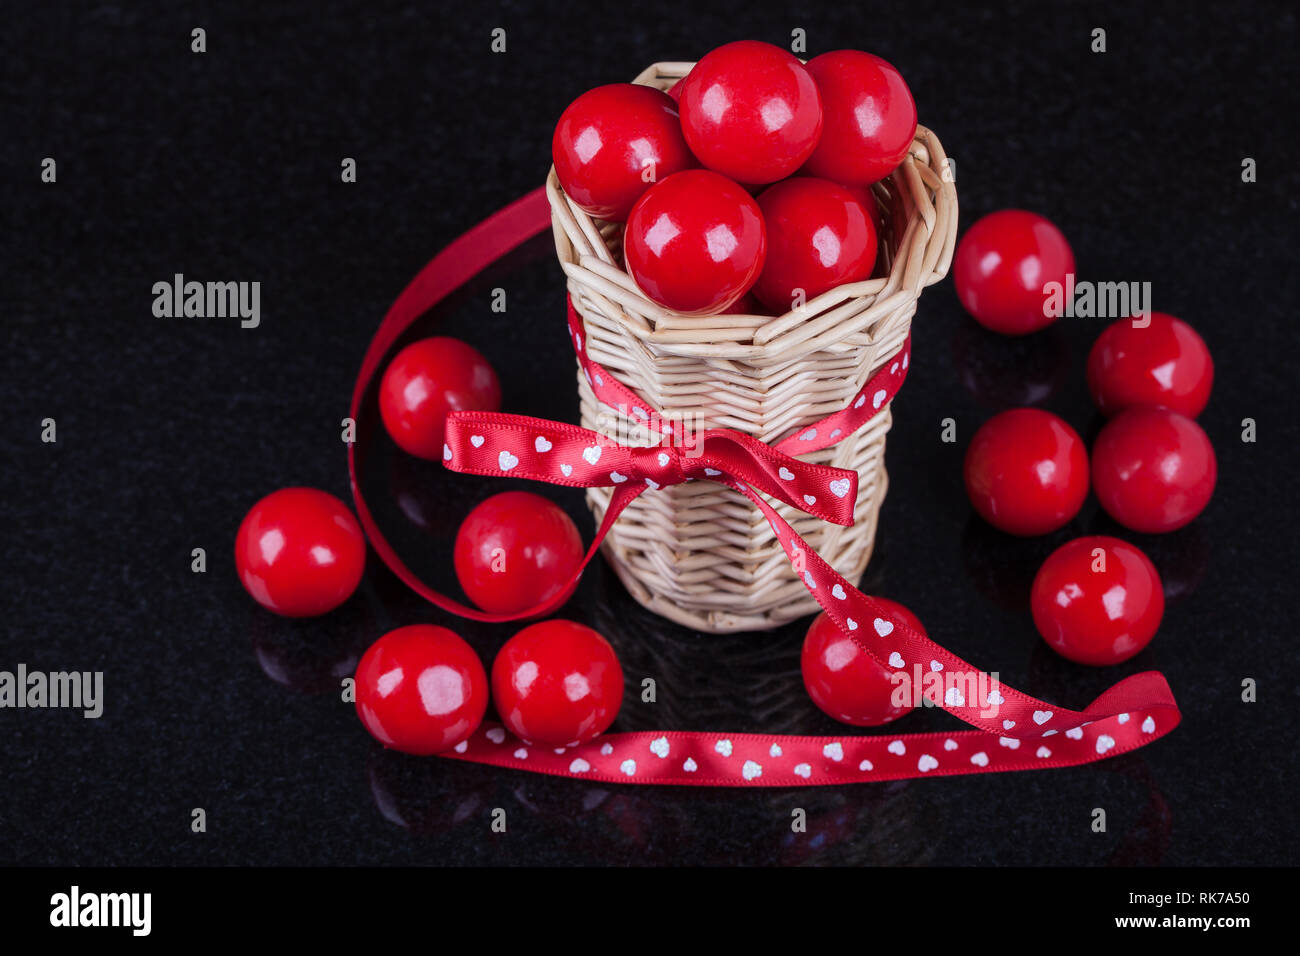 Valentine's day concept horizontal photo, basket and red sweets on black background Stock Photo